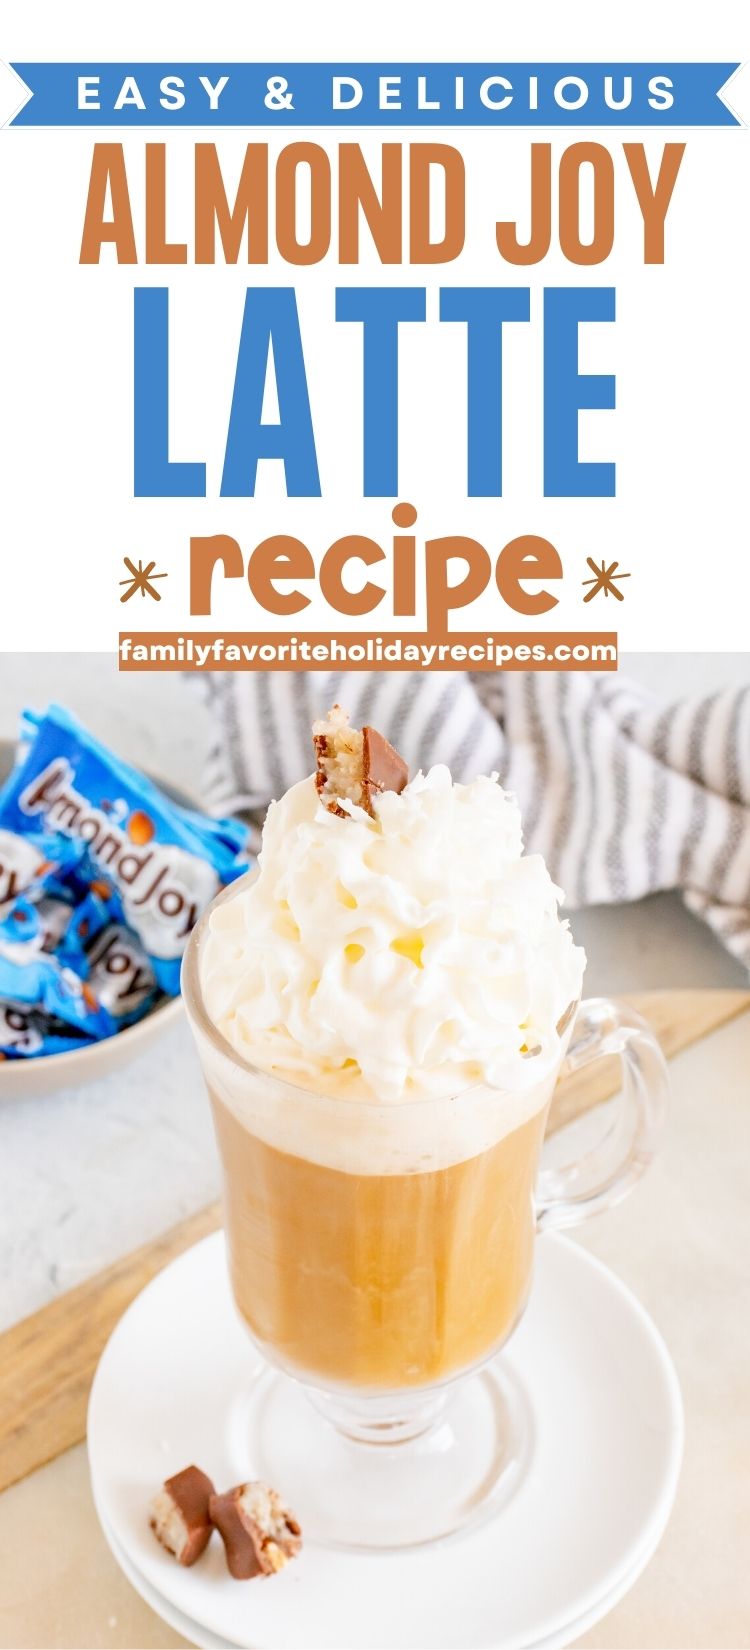 glass mug filled with Almond Joy flavored coffee, topped with whipped cream and chopped chocolate bar.